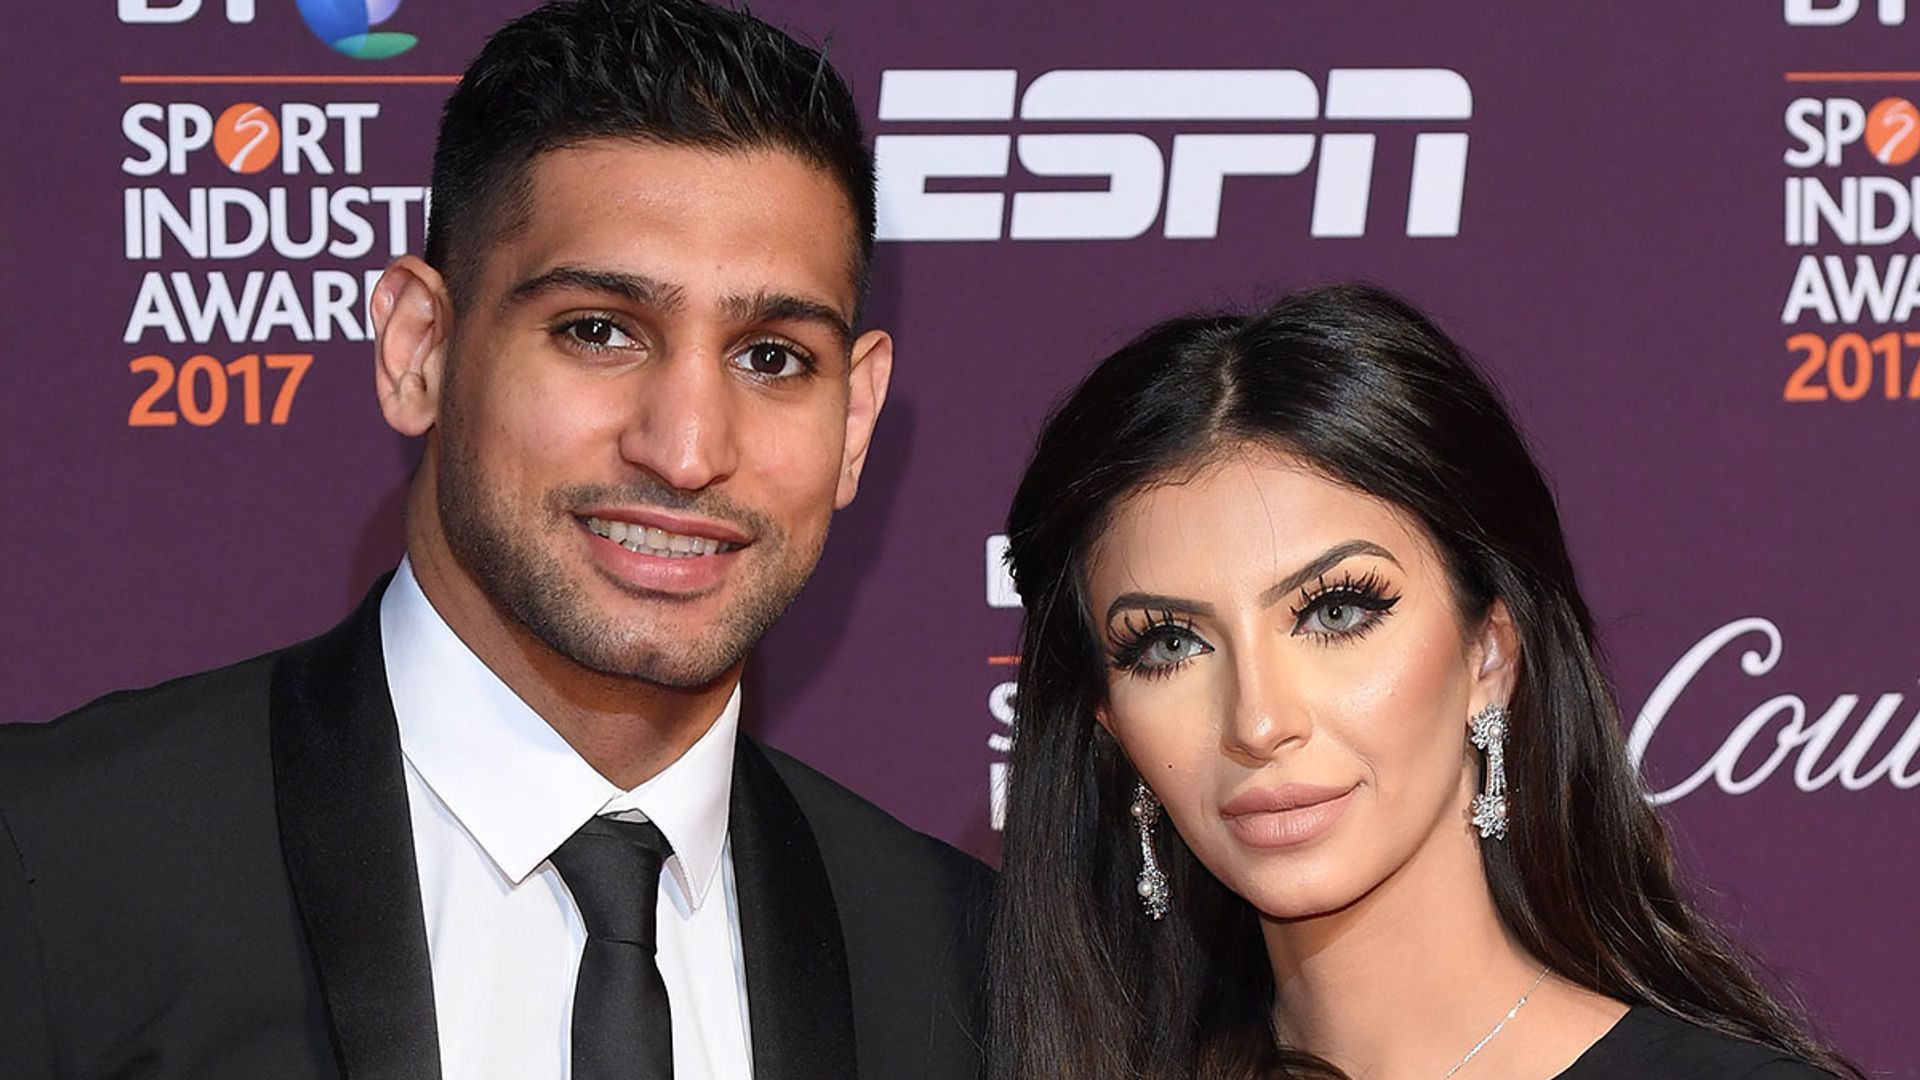 Amir Khan and wife Faryal Makhdoom expecting third baby – find out the gender